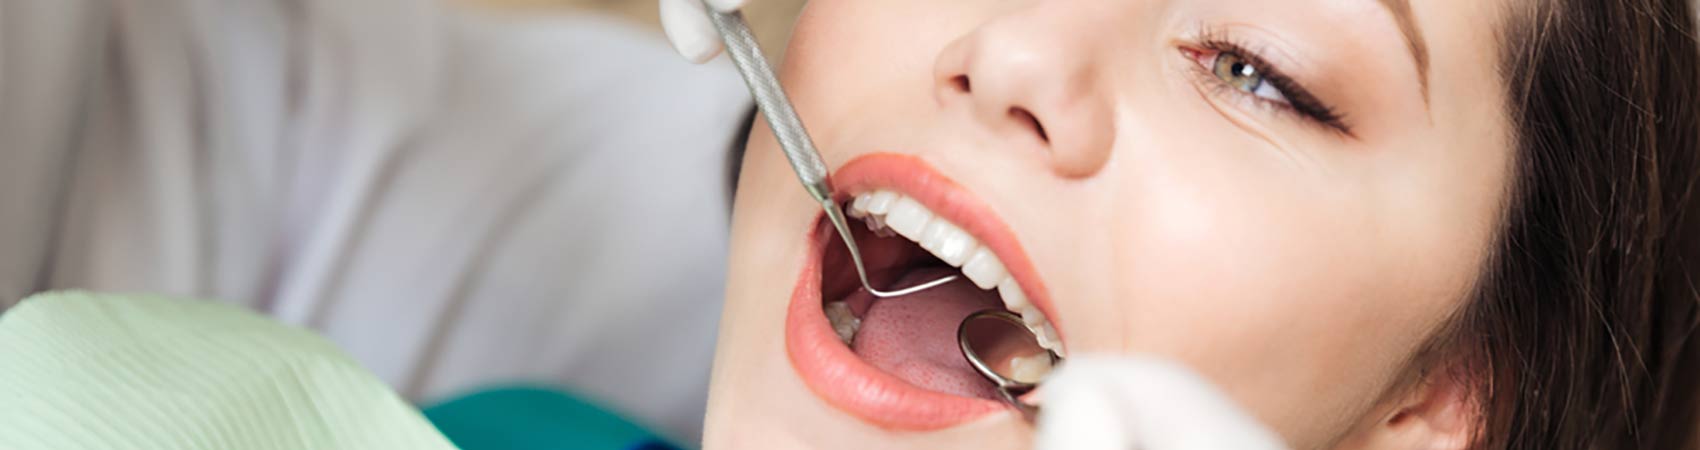 Overcome Your Cavities with Tooth-colored Composite Fillings